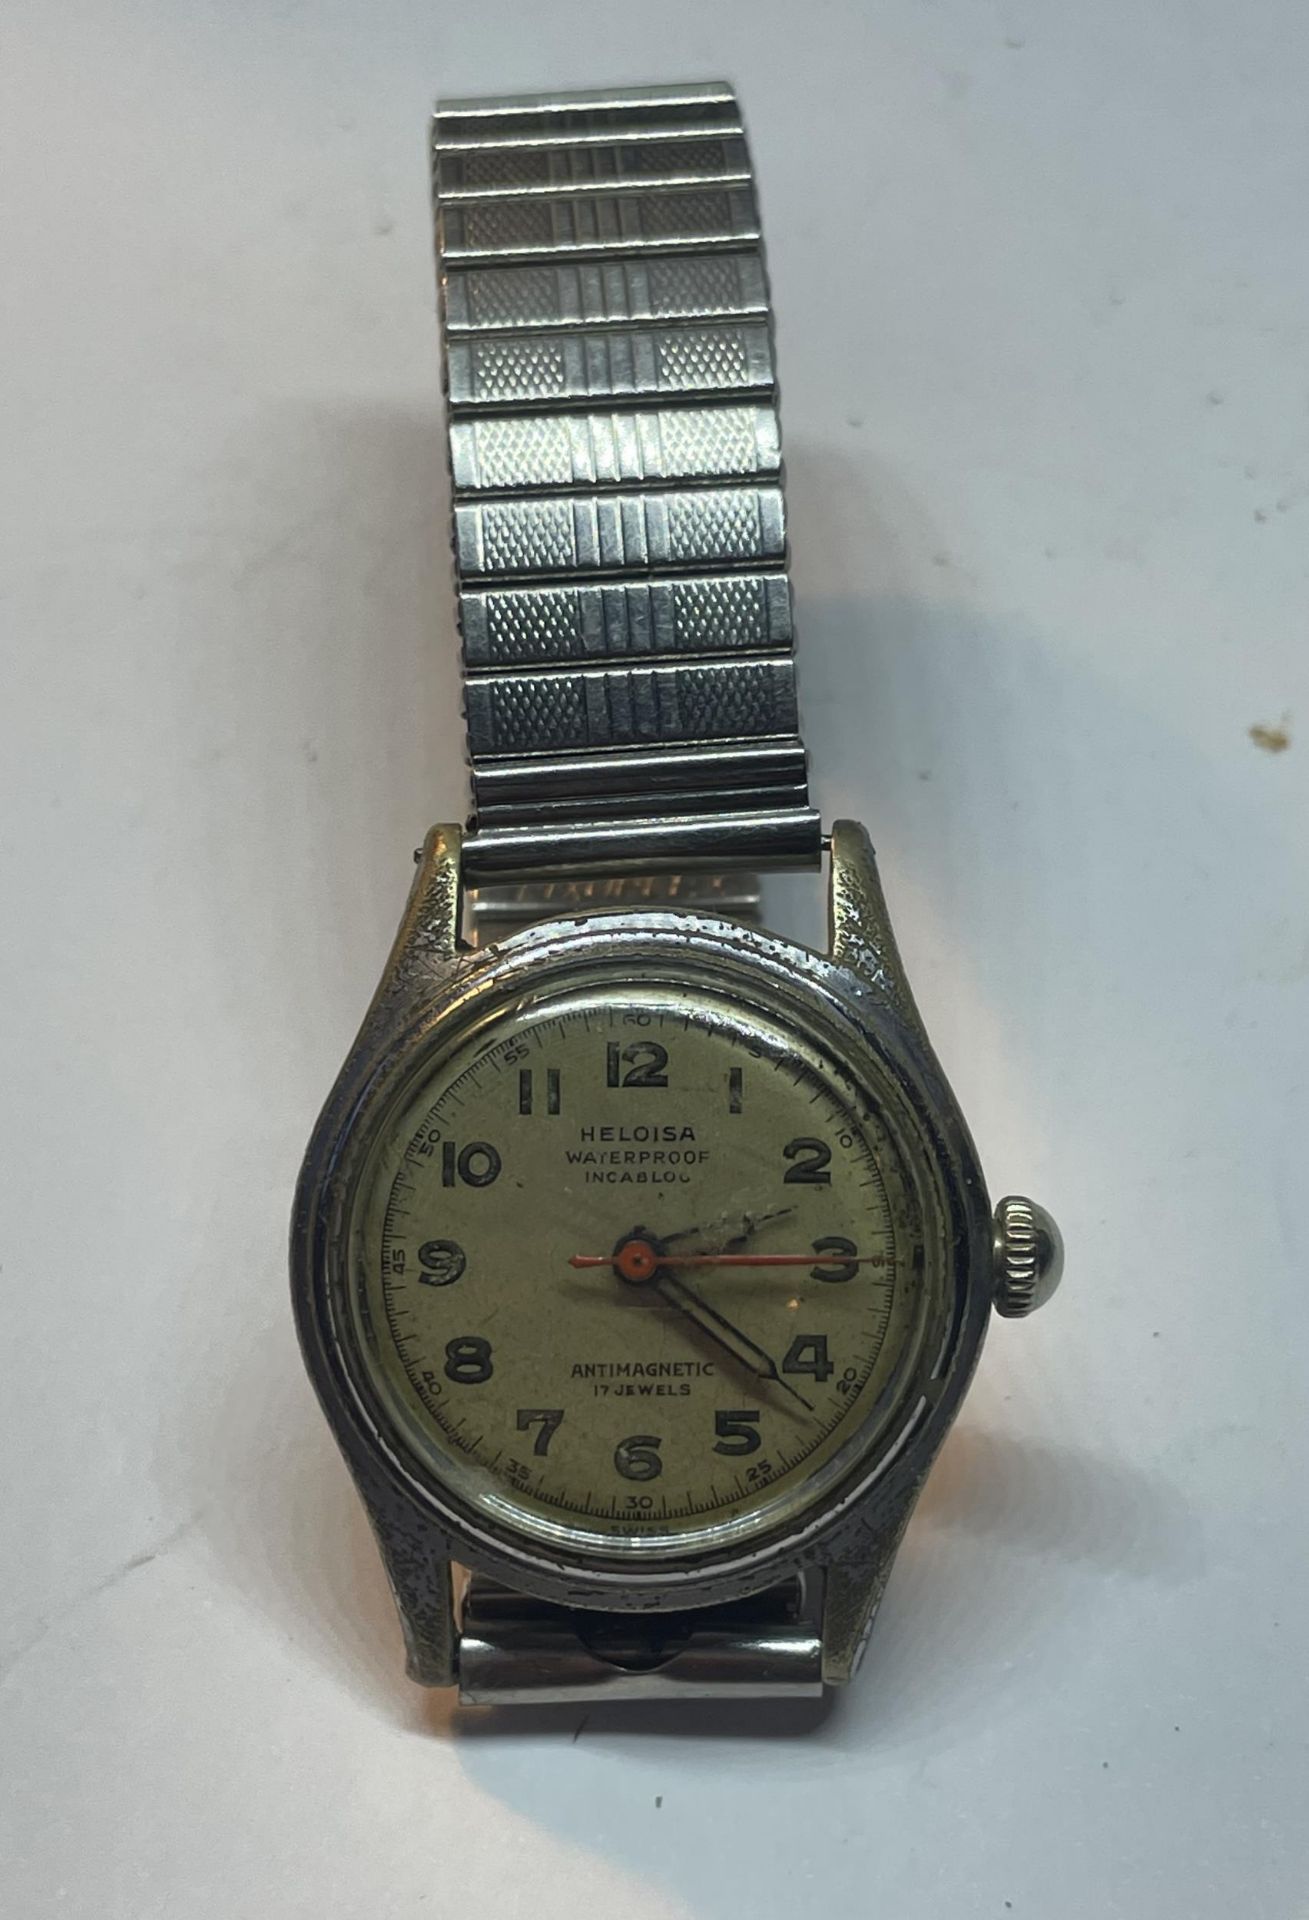 A HELOISA MILITARY STYLE WATCH SEEN WORKING BUT NO WARRANTIES